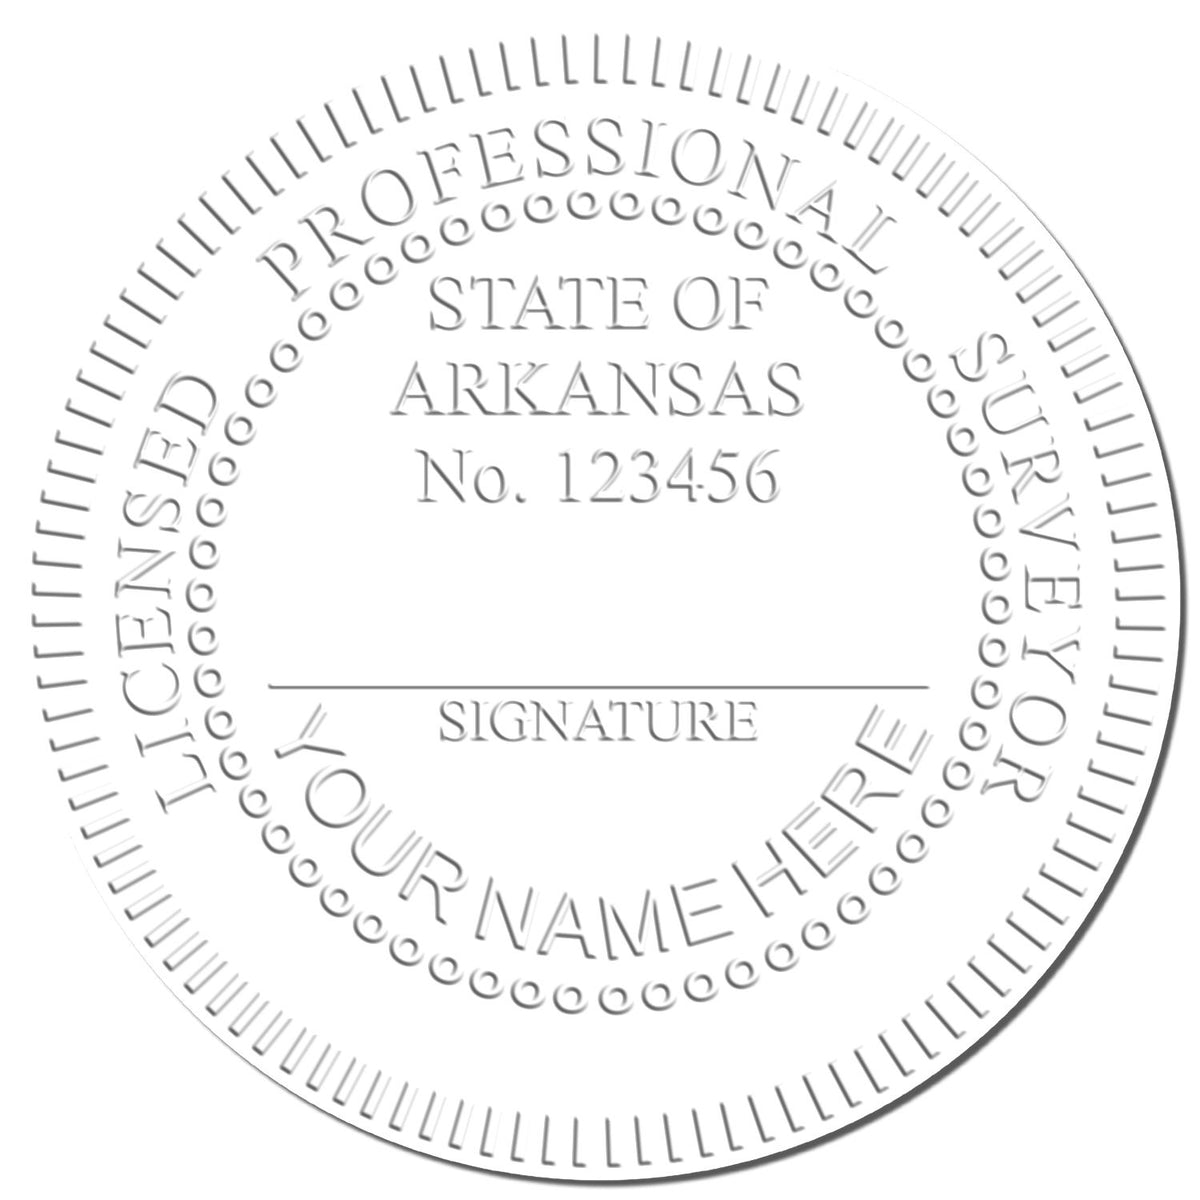 This paper is stamped with a sample imprint of the Arkansas Desk Surveyor Seal Embosser, signifying its quality and reliability.